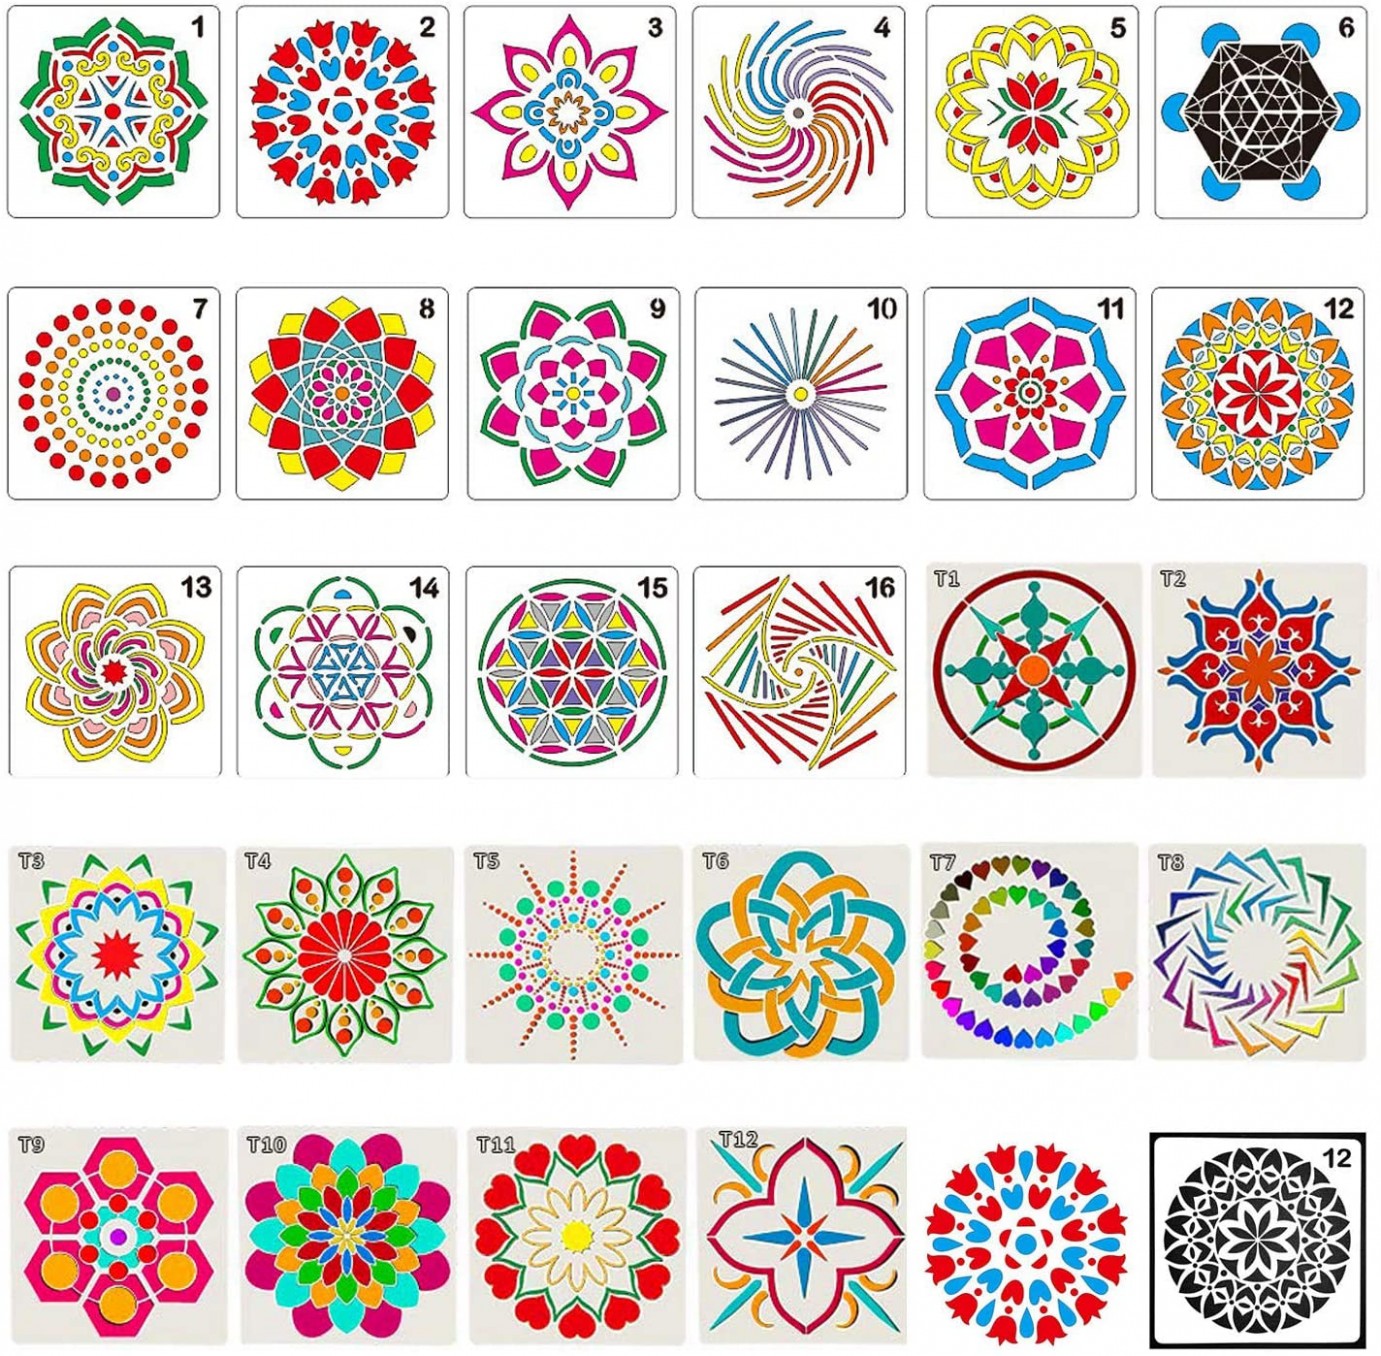 10 Pack Mandala Dot Painting Templates Stencils For Diy Rocks Stone Airbrush Wall Art Canvas Wood Furniture Cards Painting Art Projects Rock Painting Cl Near Me